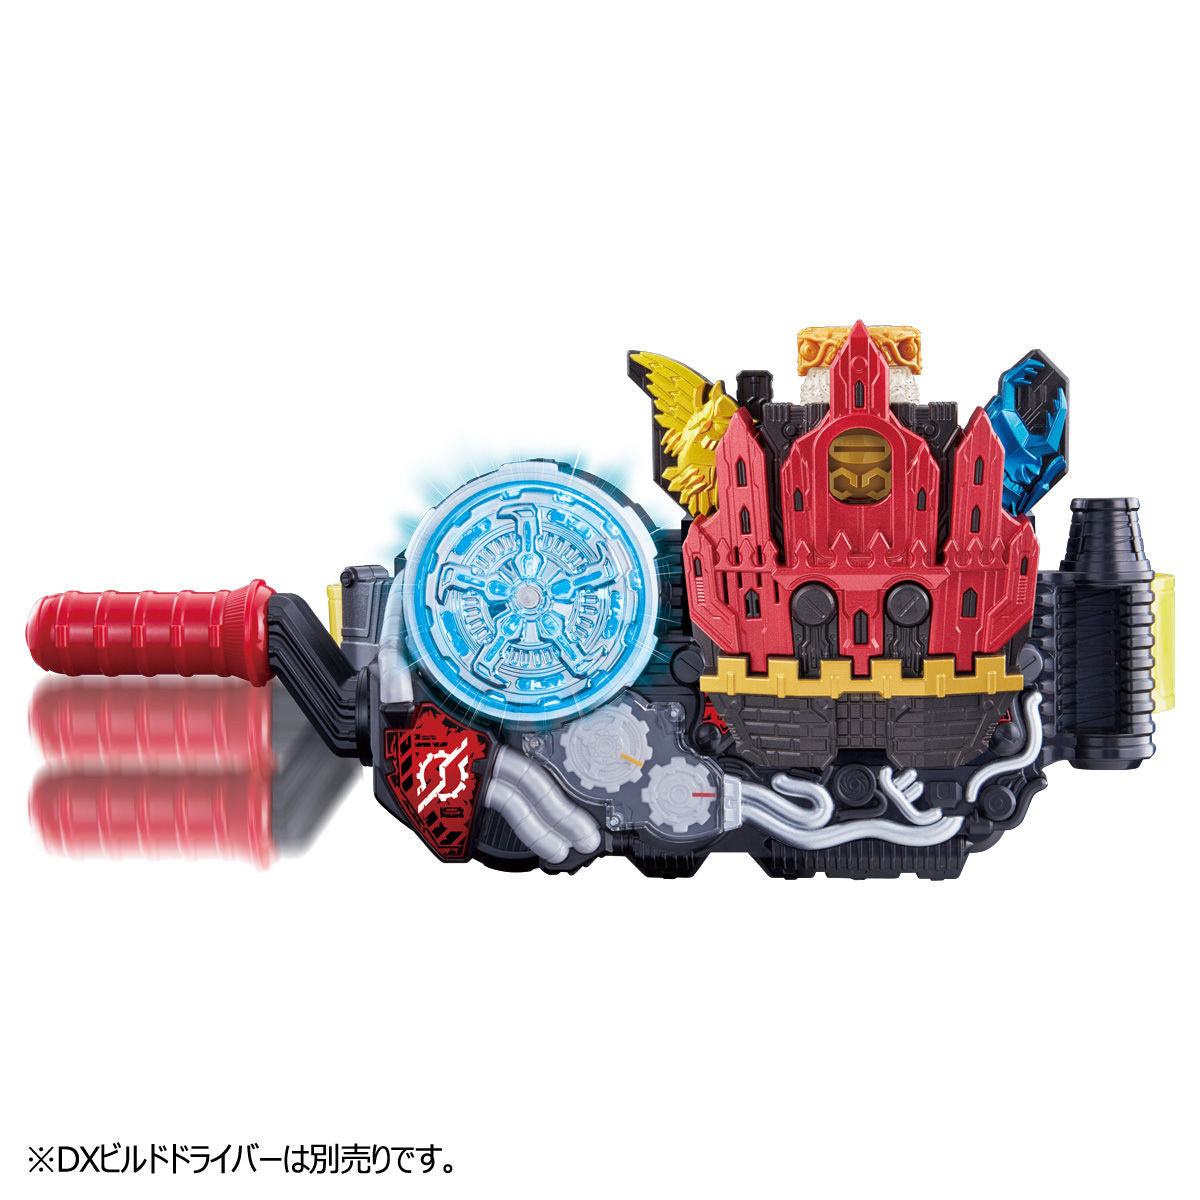 Kamen Rider Grease New World V-Cinext w/ DX Grease Perfect Kingdom